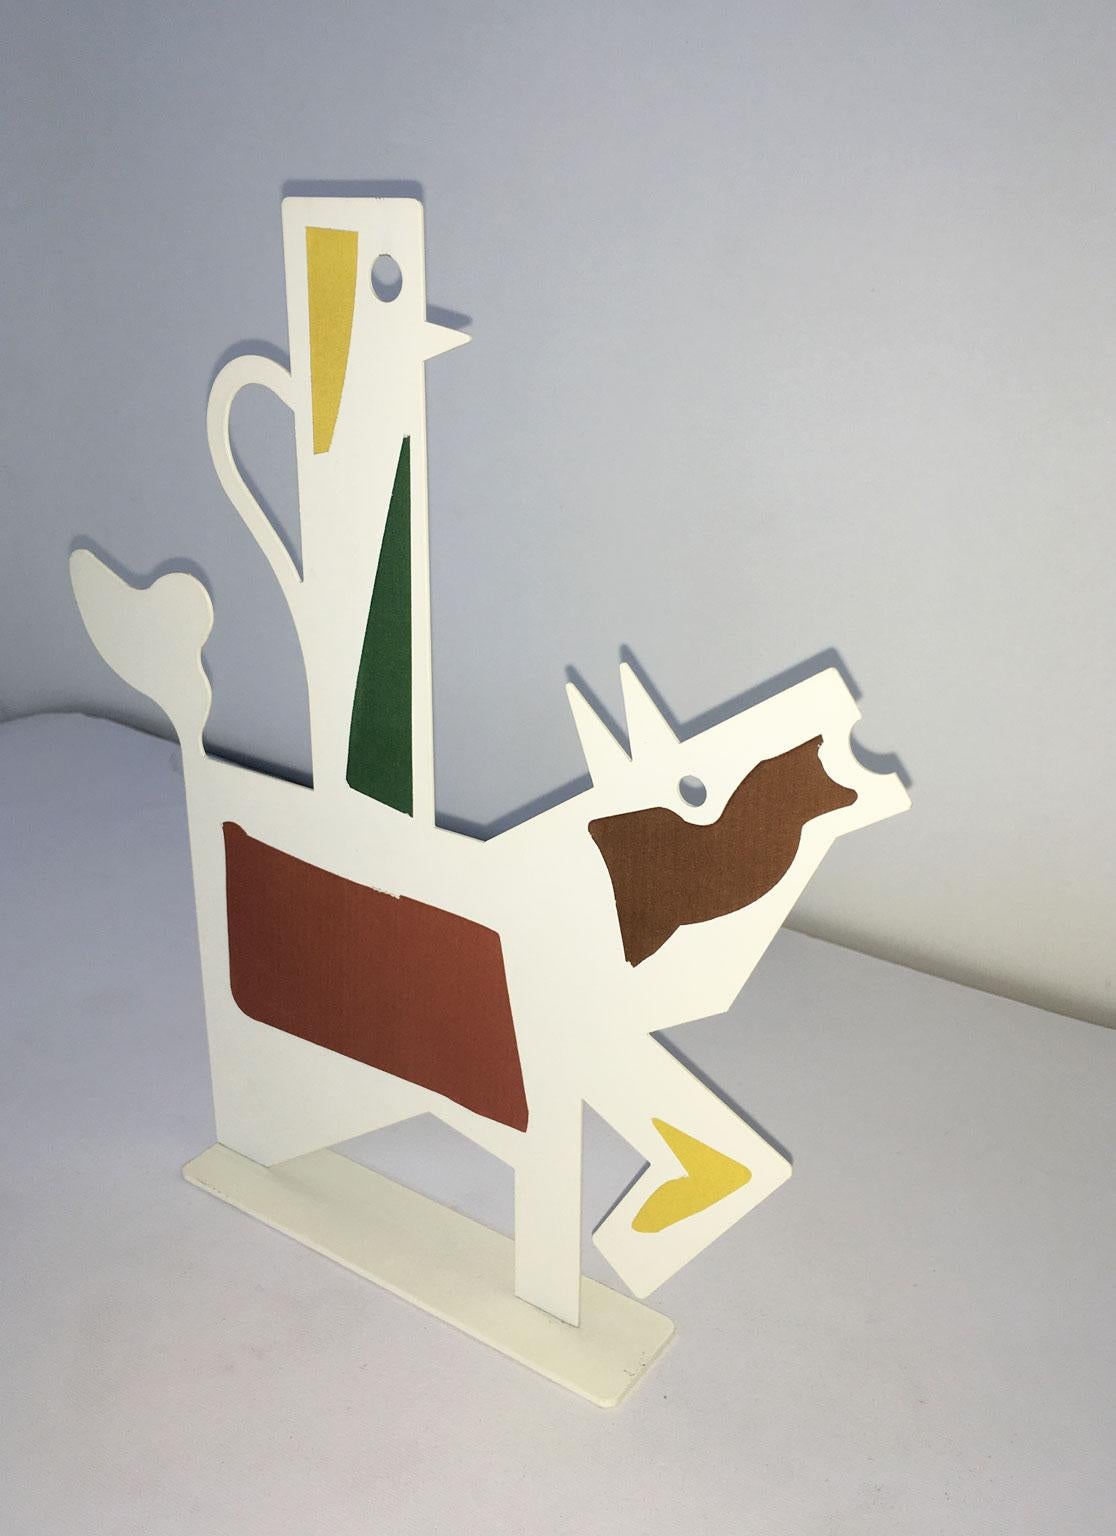 Italy 1980 Riccardo Dalisi White Painted Metal Sculpture Muccacaffè In Good Condition For Sale In Brescia, IT